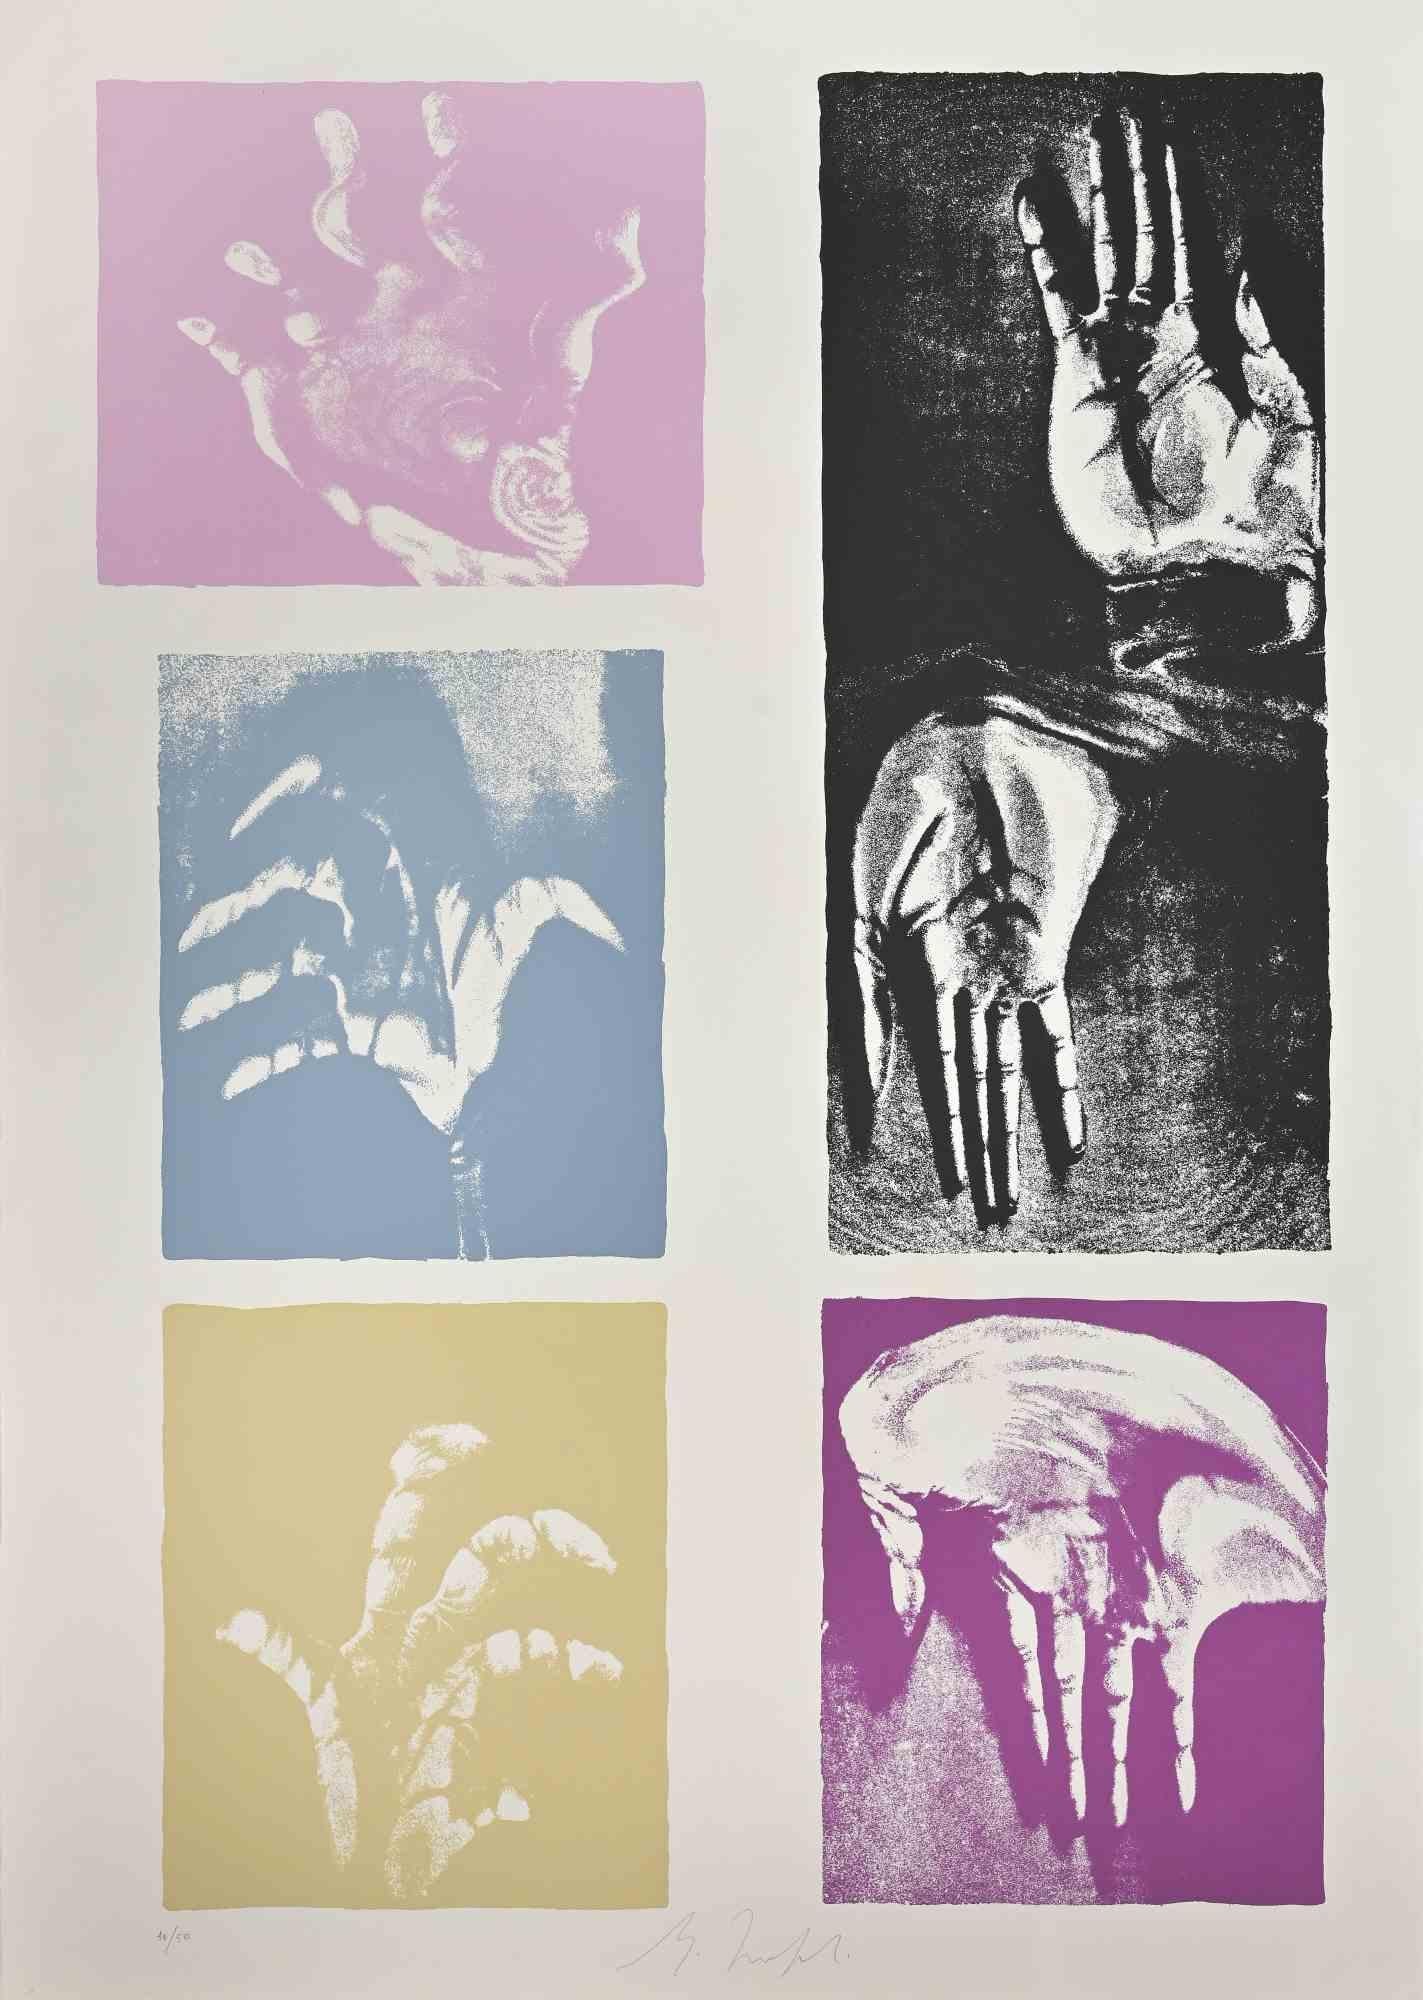 Hands is a Lithograph realized by Mino Trafeli in 1980s. 

Edition 16/50.

Hand signed.

Good conditions.

 

Mino Trafeli (Volterra, December 29, 1922 - Volterra, August 9, 2018) was an Italian sculptor and partisan.

Fundamental to his education